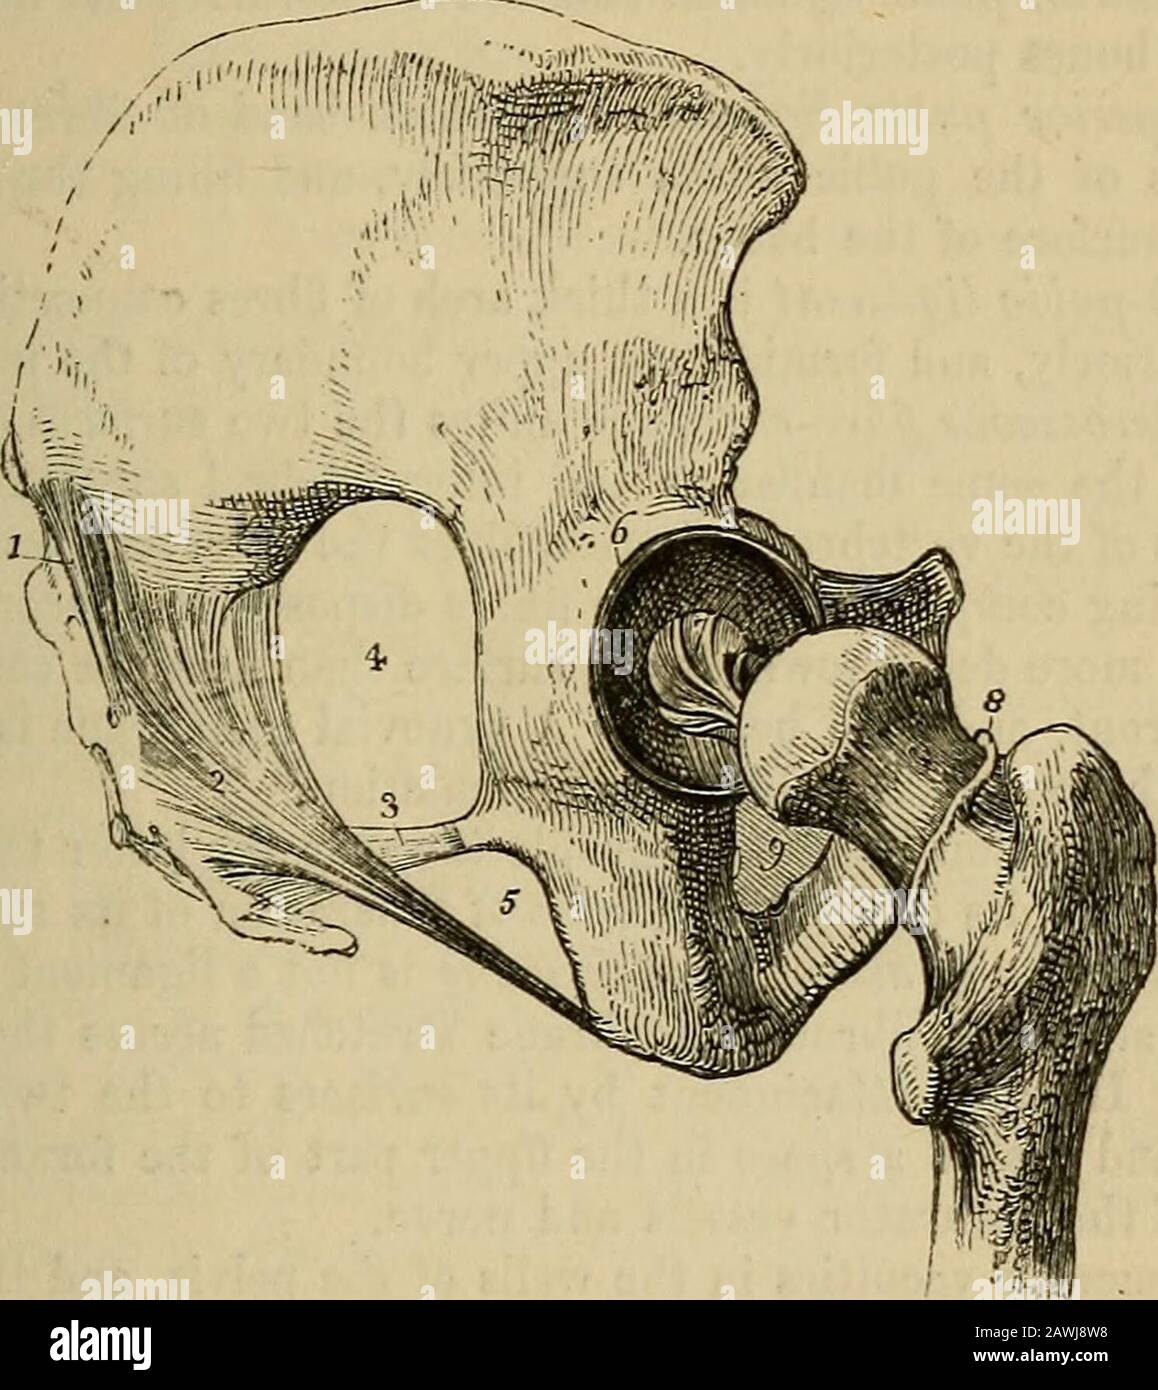 The anatomist's vade mecum : a system of human anatomy . ament, and behind with the gluteus maximus, to some ofthe fibres of which it gives origin. By its superior border it formspart of the boundary of the lesser ischiatic foramen, and by its lower * The ligaments of the pelvis and hip-joint. 1. The lower part of the ante-rior common ligament of the vertebras, extending downwards over the frontof the sacrum. 2. The lumbo-sacral ligament. 3. The lumbo-iliac liga-ment. 4. The anterior sacro-iliac ligaments. 5. The obturator membrane.6. Pouparts ligament. 7. Gimbernats ligament. 8. The capsular Stock Photo